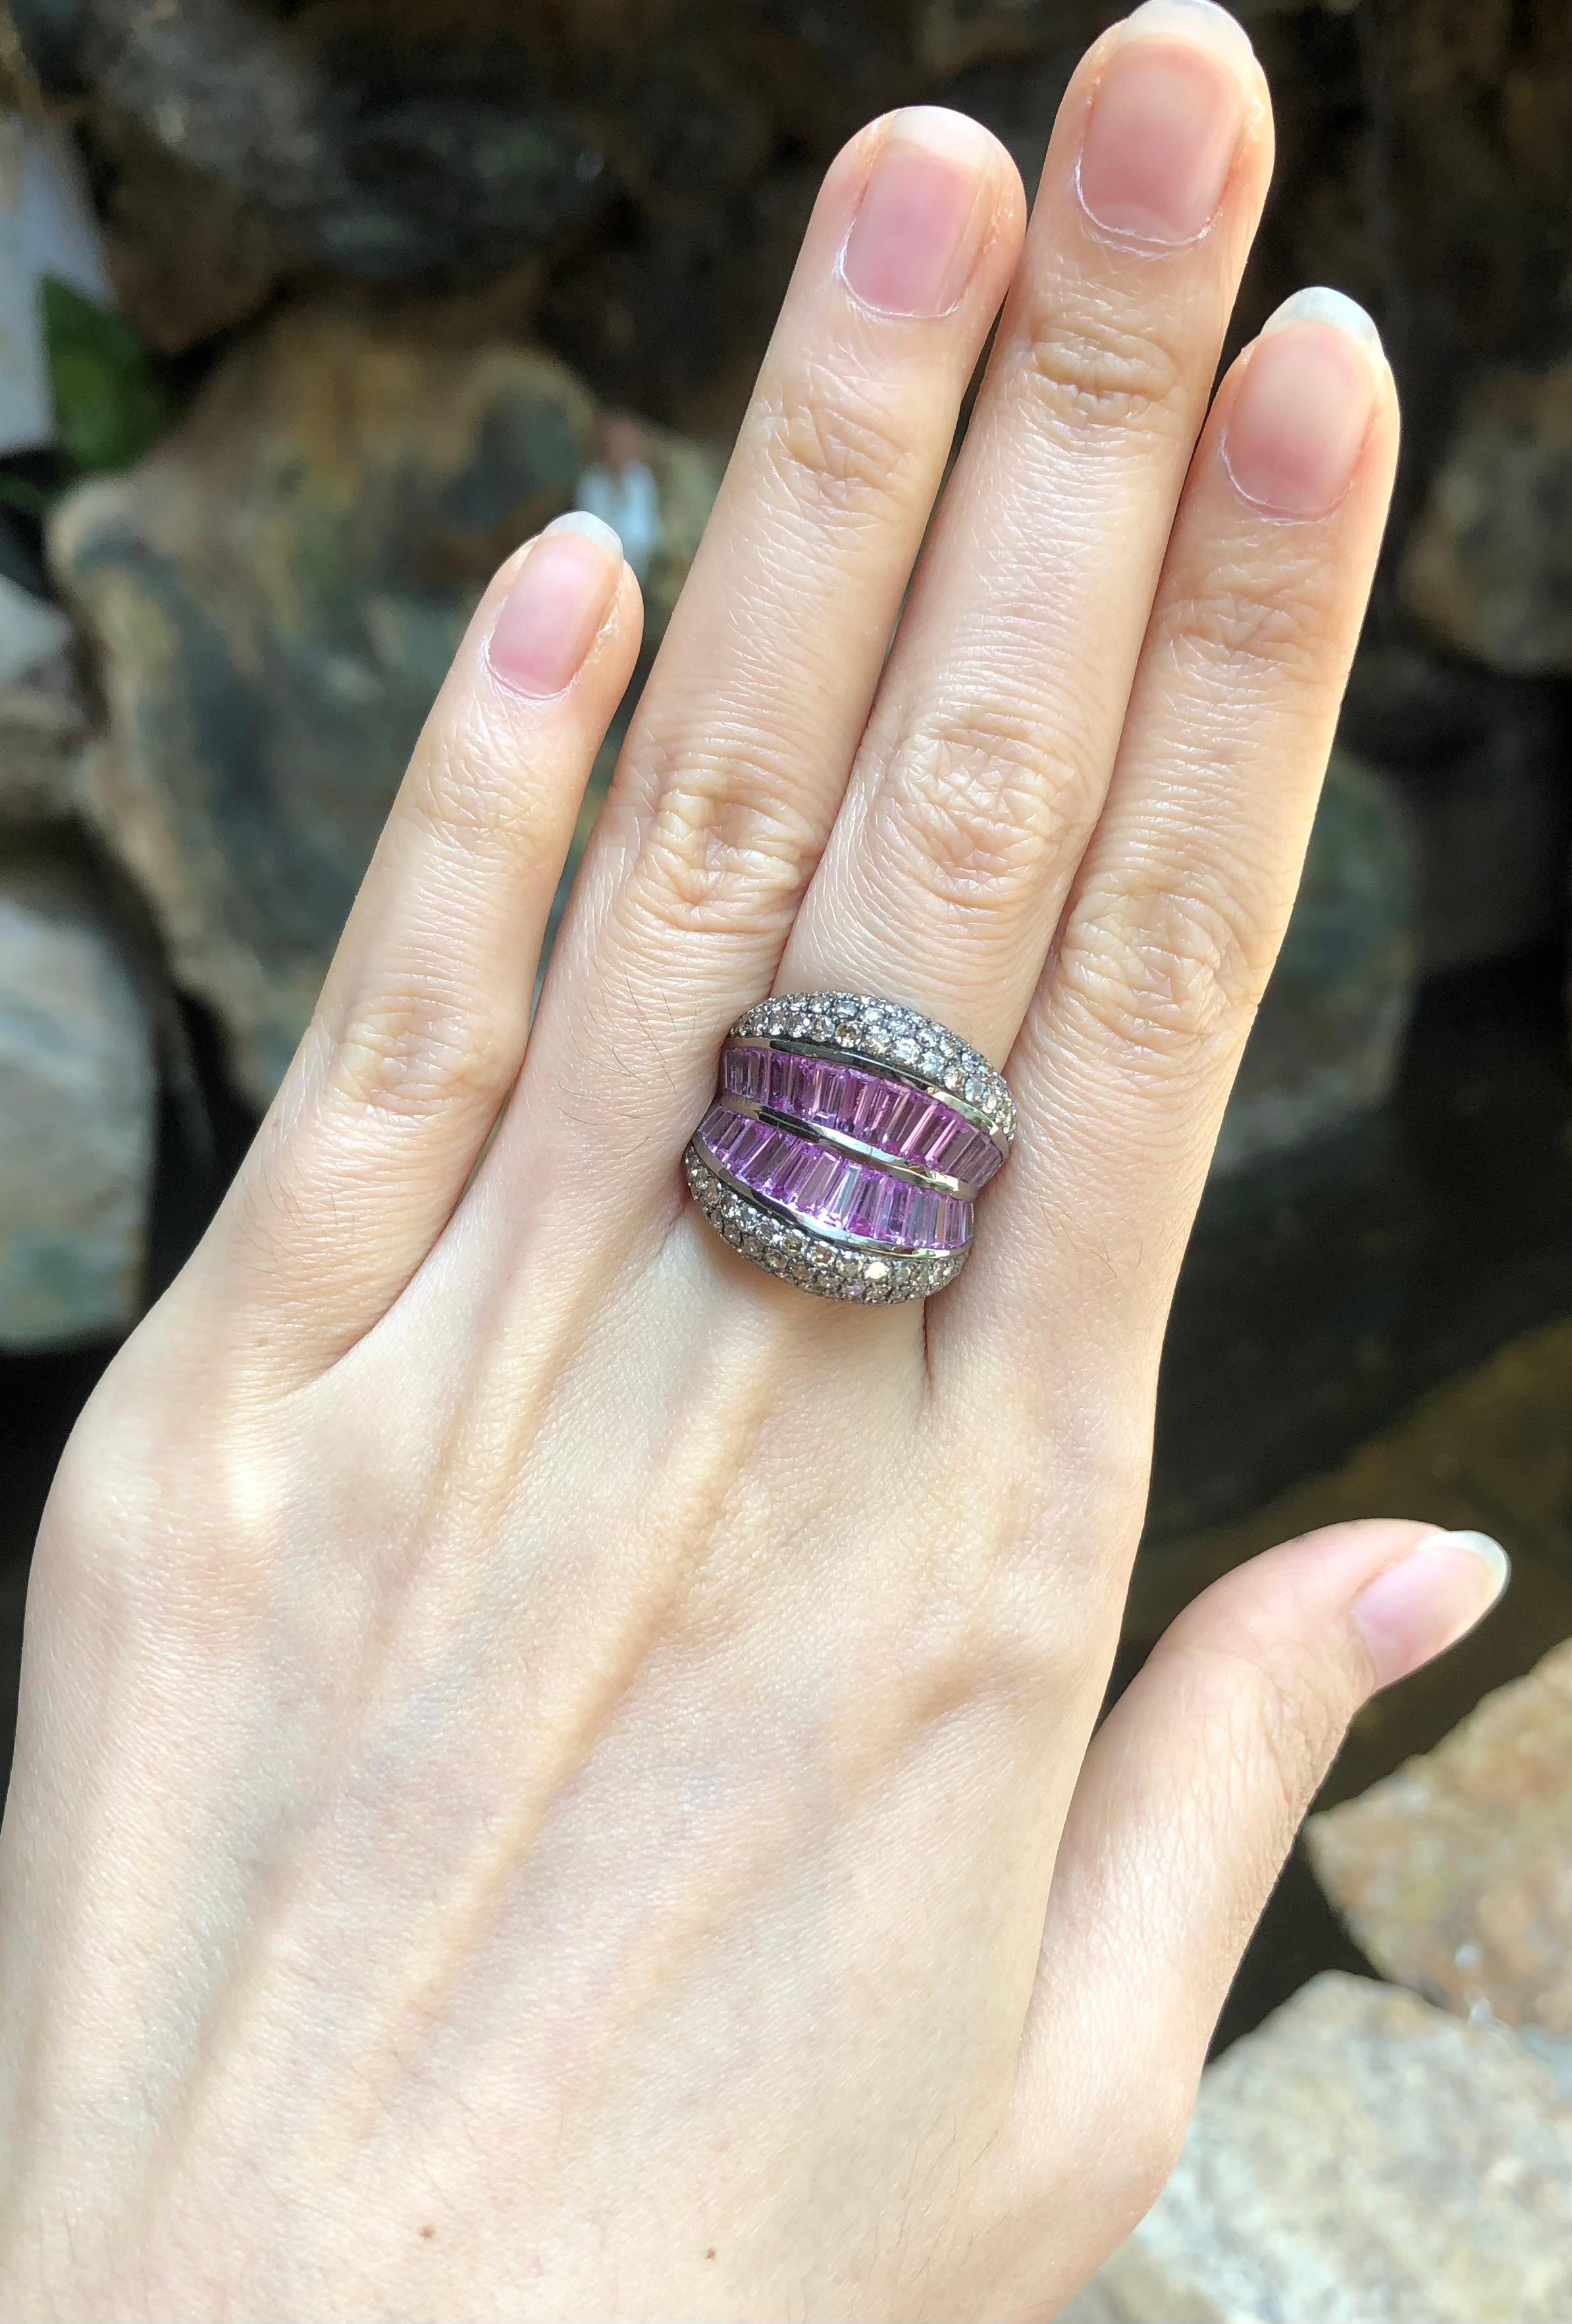 Pink Sapphire 3.84 carats with Brown Diamond 1.56 carats Ring set in 18 Karat White Gold Settings

Width:  2.0 cm 
Length: 2.0 cm
Ring Size: 52
Total Weight: 13.61 grams

